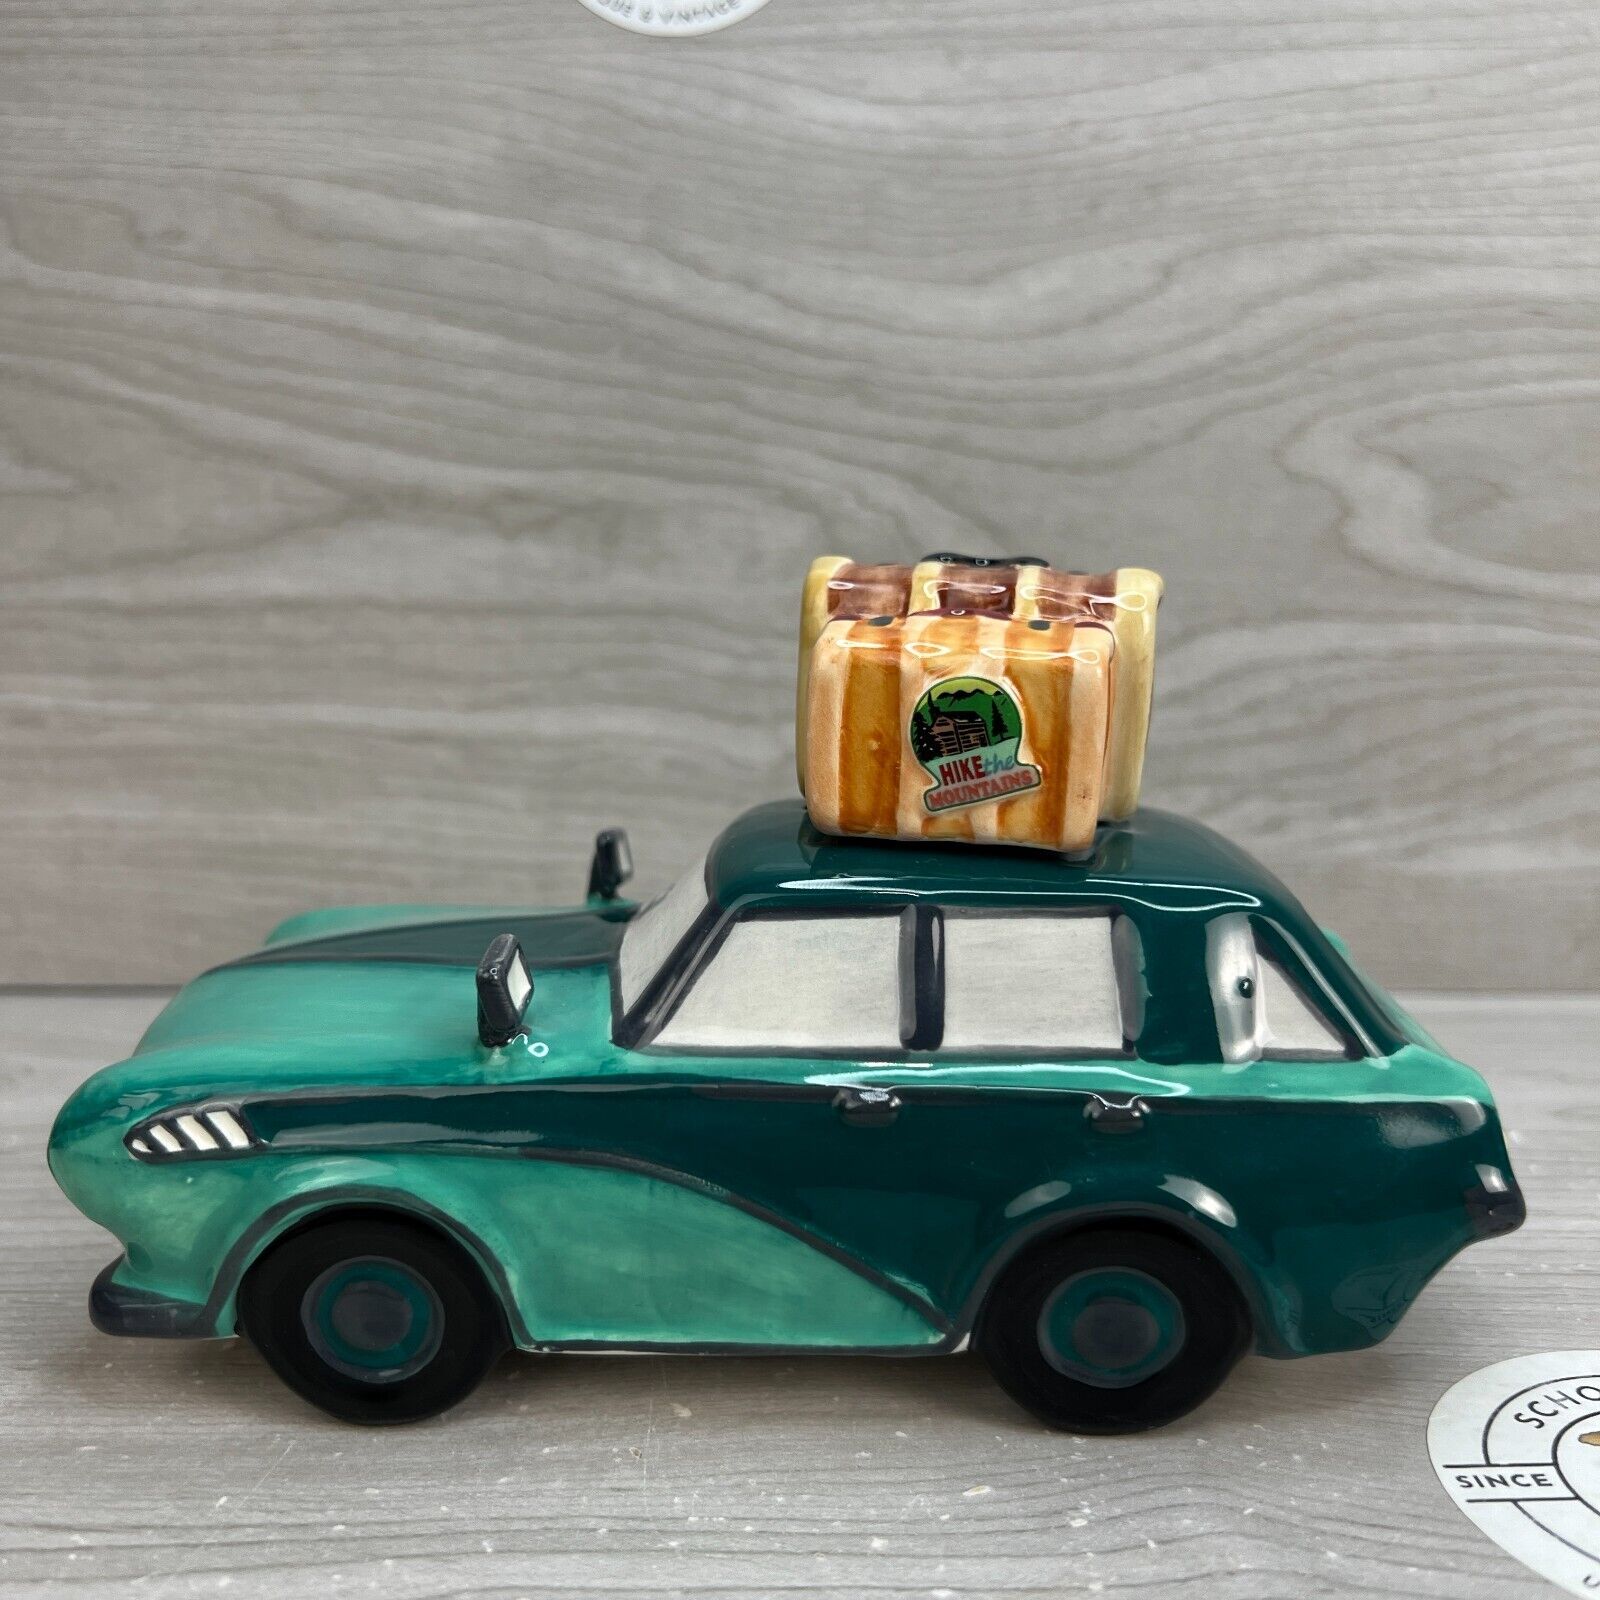 Robin Roderick Ceramic Coin Bank Green Hit The Road Car Travel Luggage Road Trip